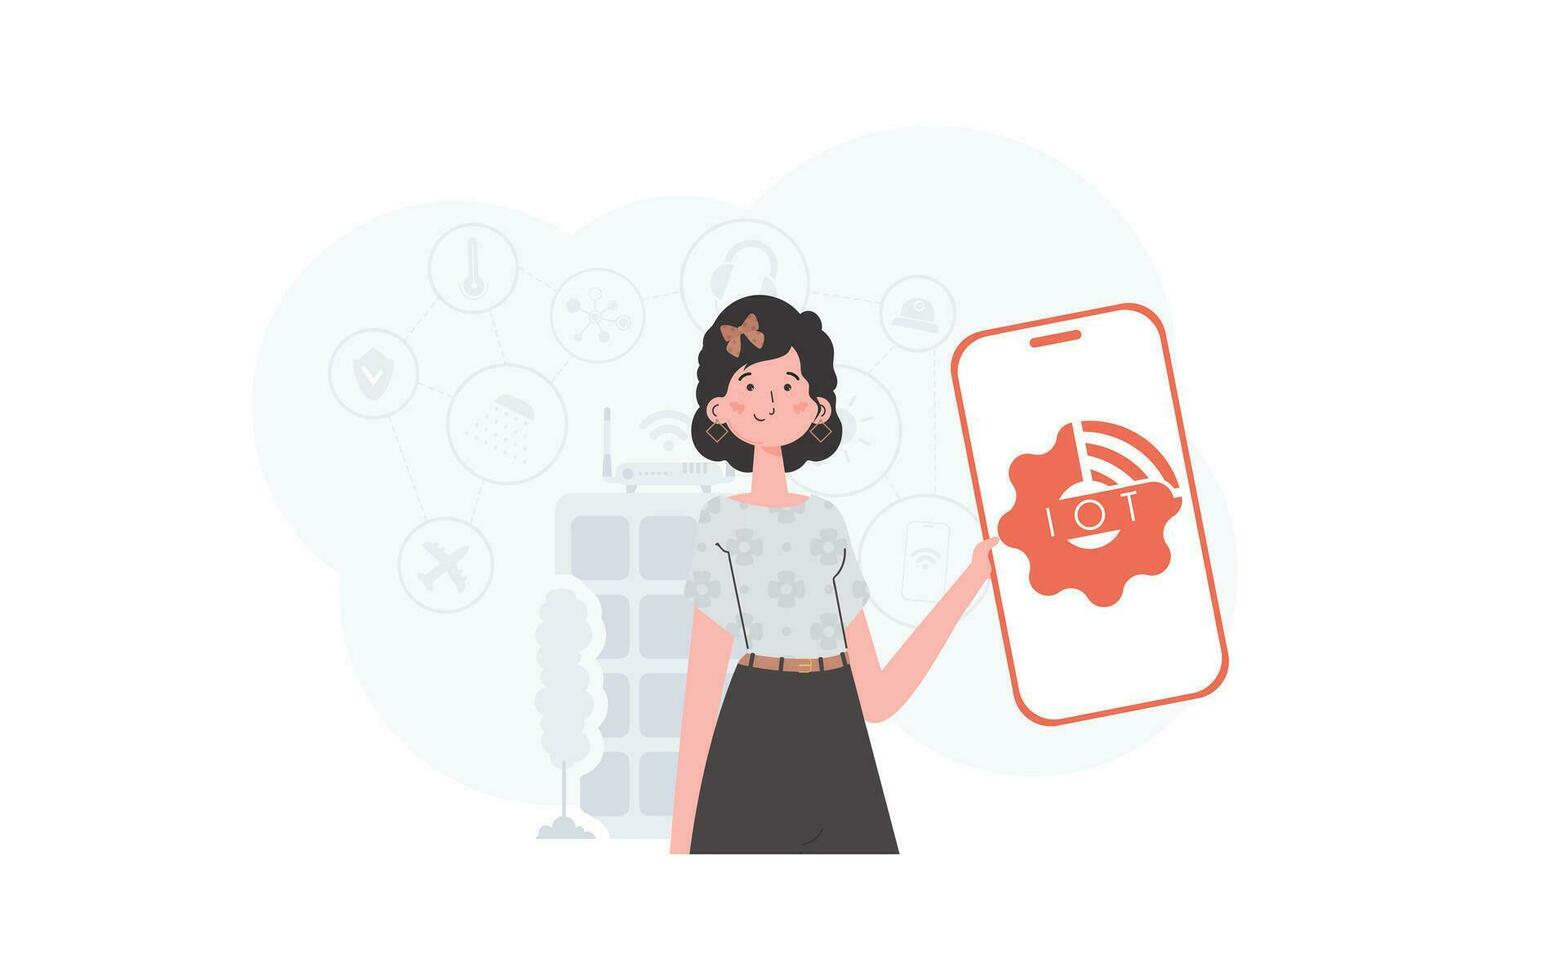 IoT concept. A woman holds a phone with the IoT logo in her hands. Vector illustration in flat style.